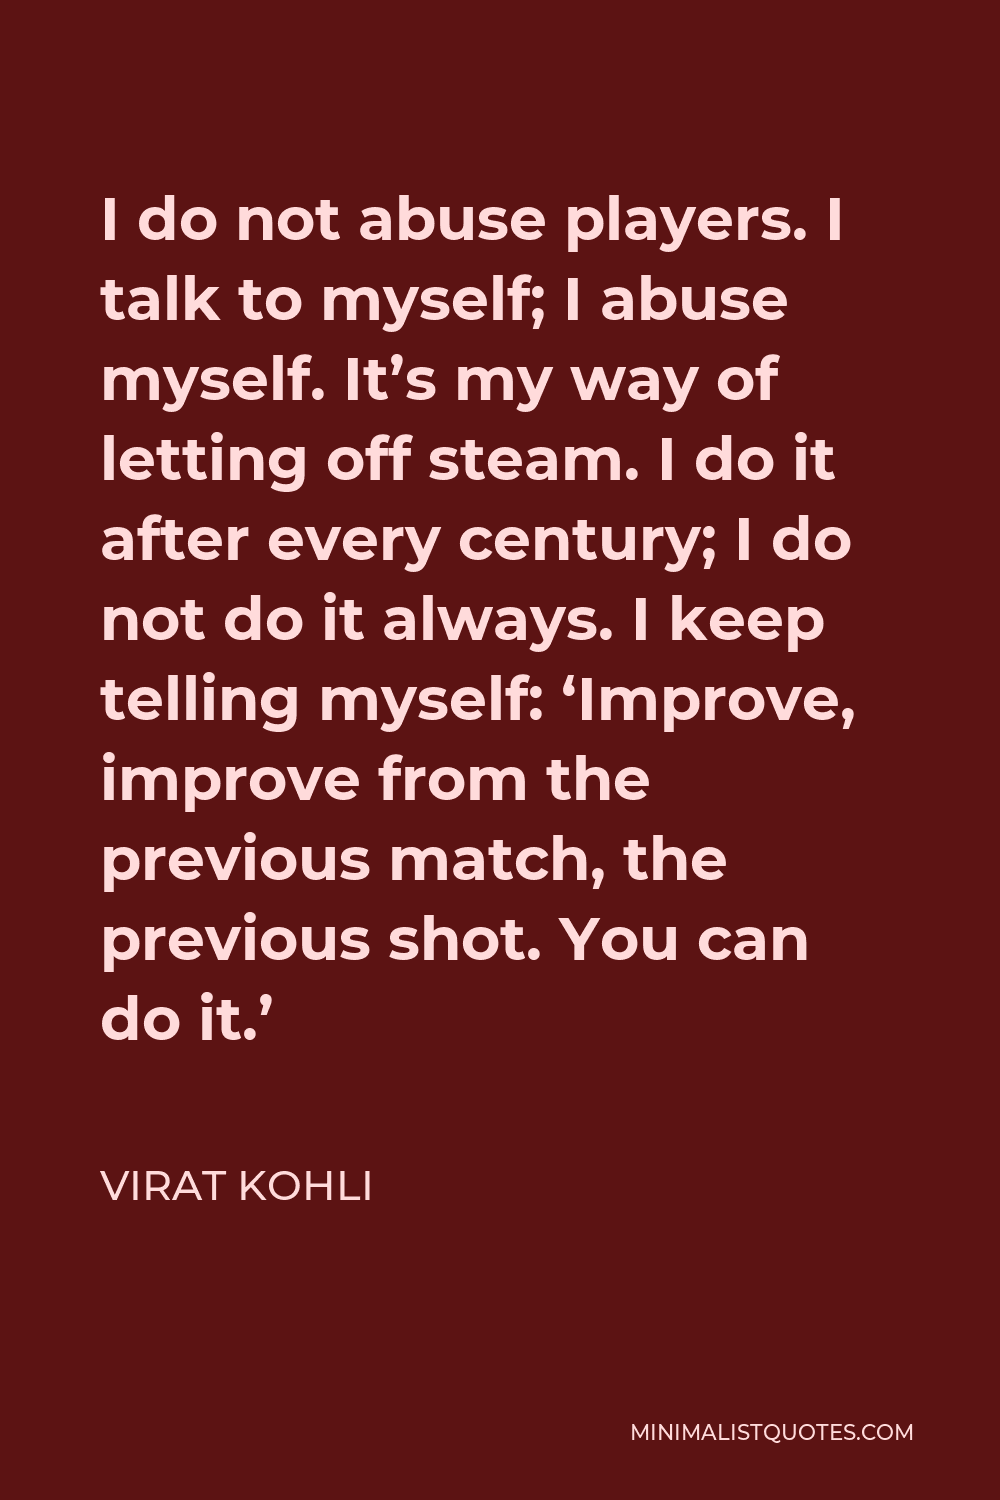 Virat Kohli Quote - I do not abuse players. I talk to myself; I abuse myself. It’s my way of letting off steam. I do it after every century; I do not do it always. I keep telling myself: ‘Improve, improve from the previous match, the previous shot. You can do it.’